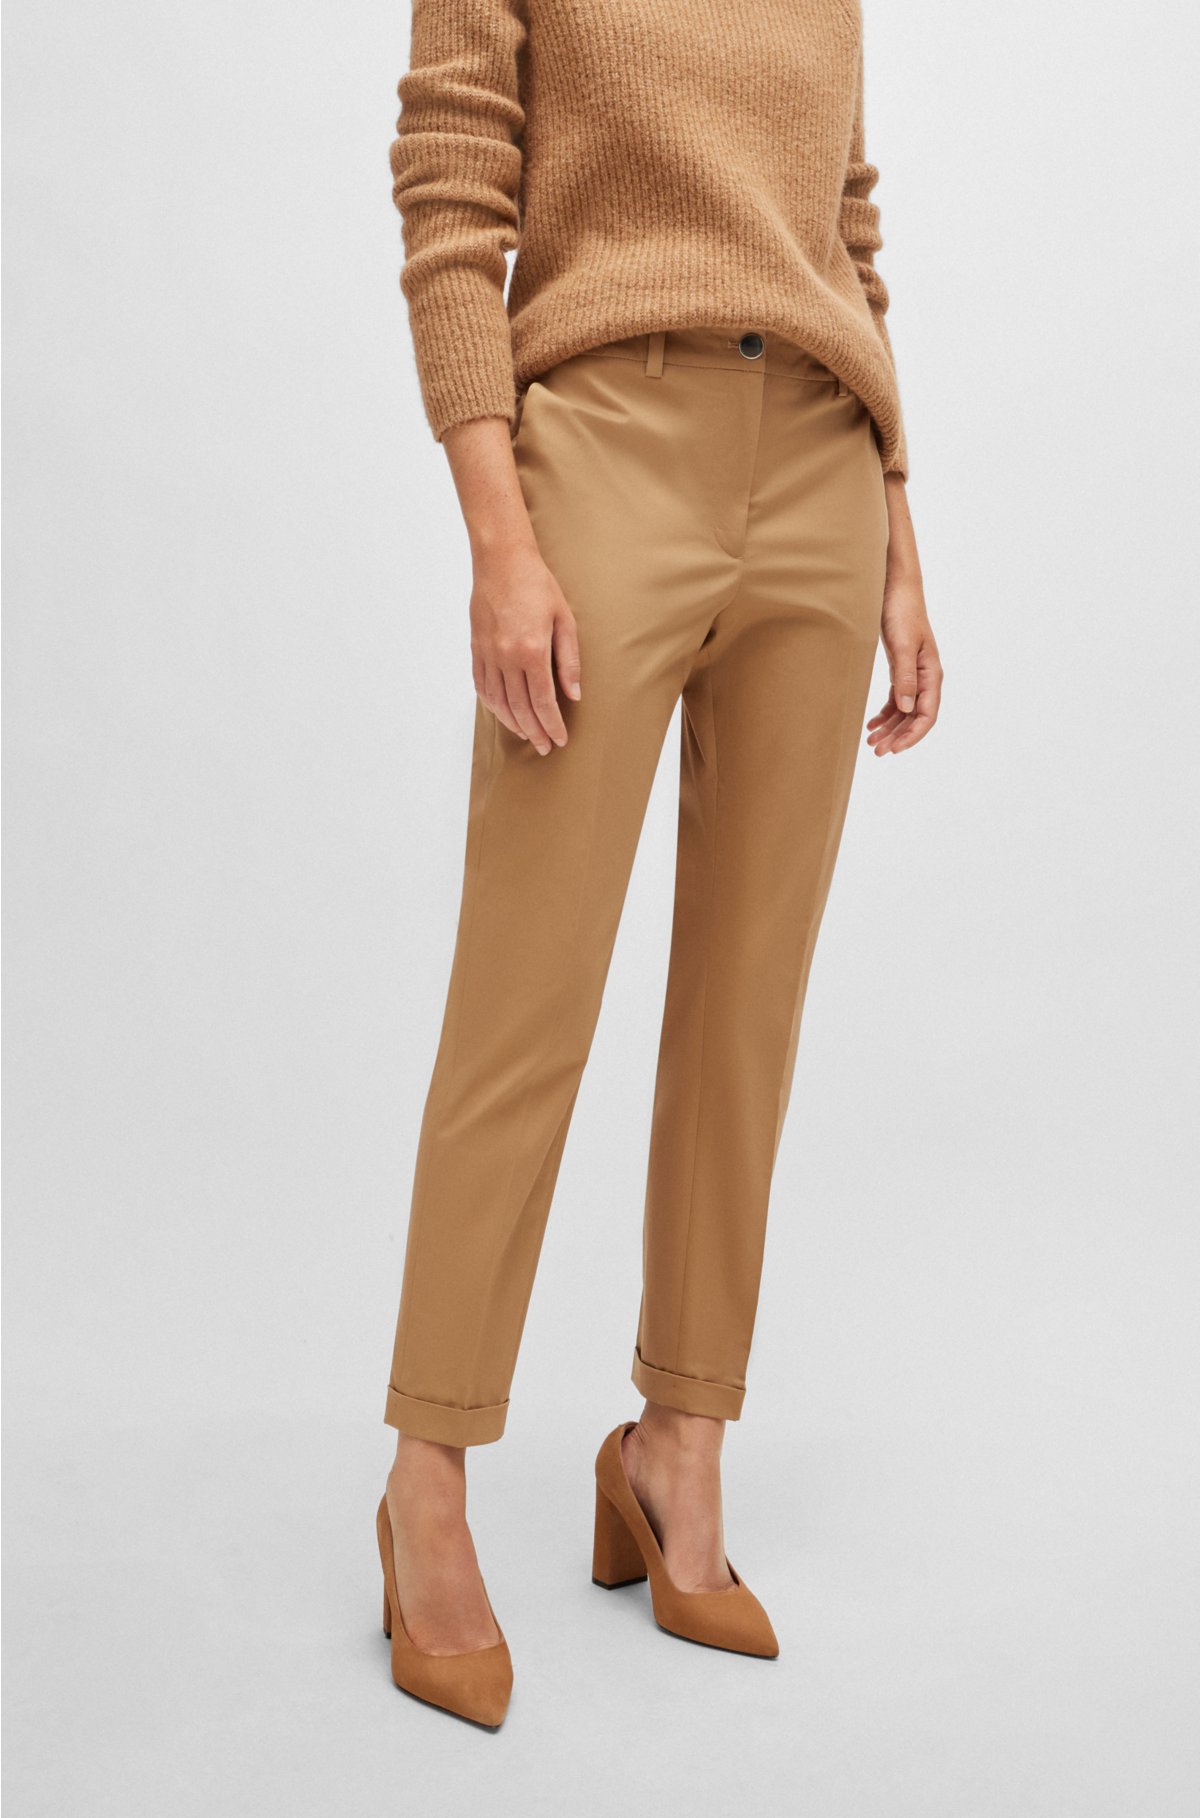 Women's High-rise Pleat Front Tapered Ankle Pants - A New Day